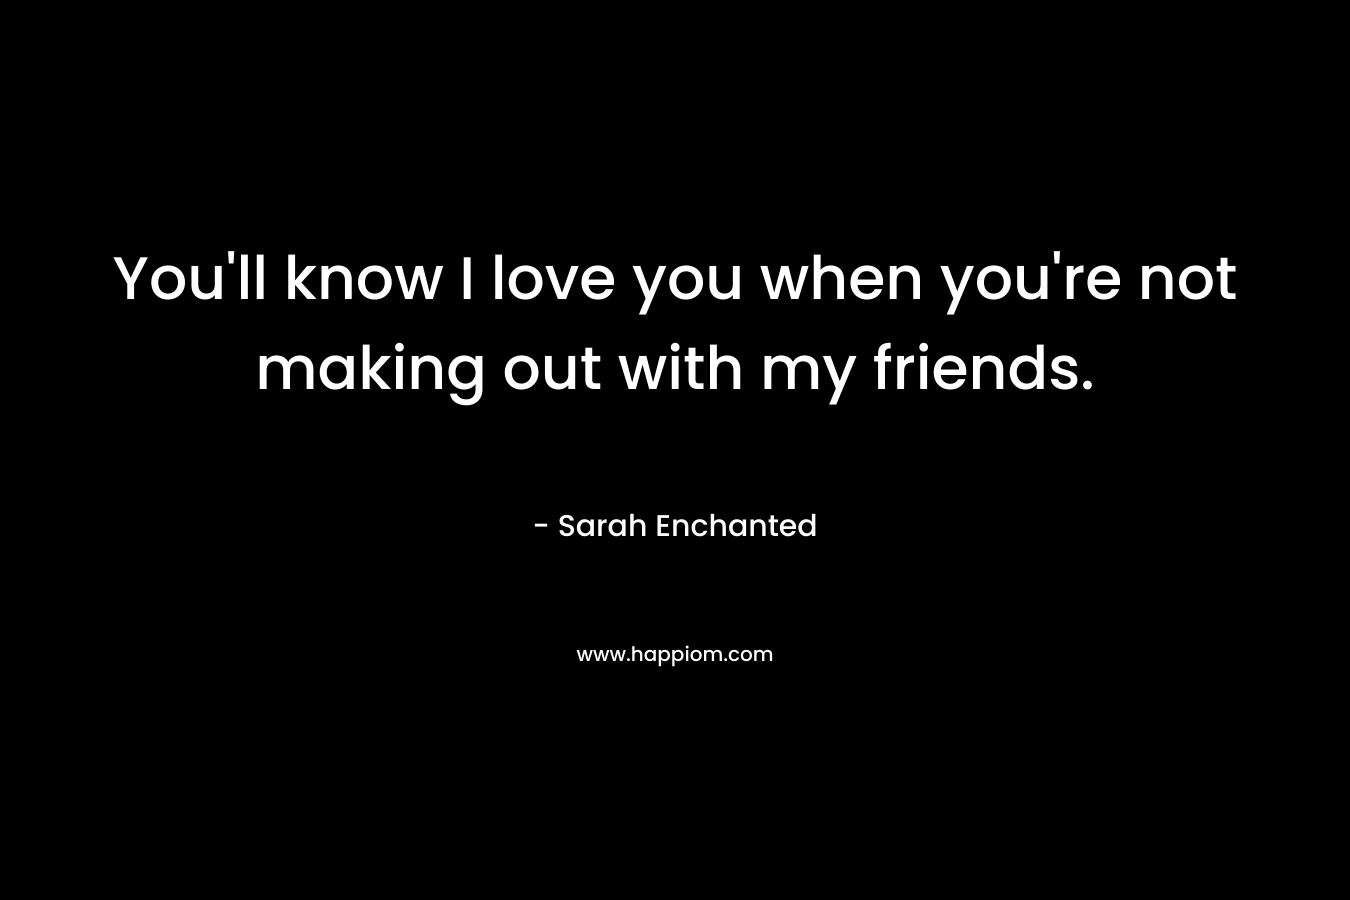 You’ll know I love you when you’re not making out with my friends. – Sarah Enchanted